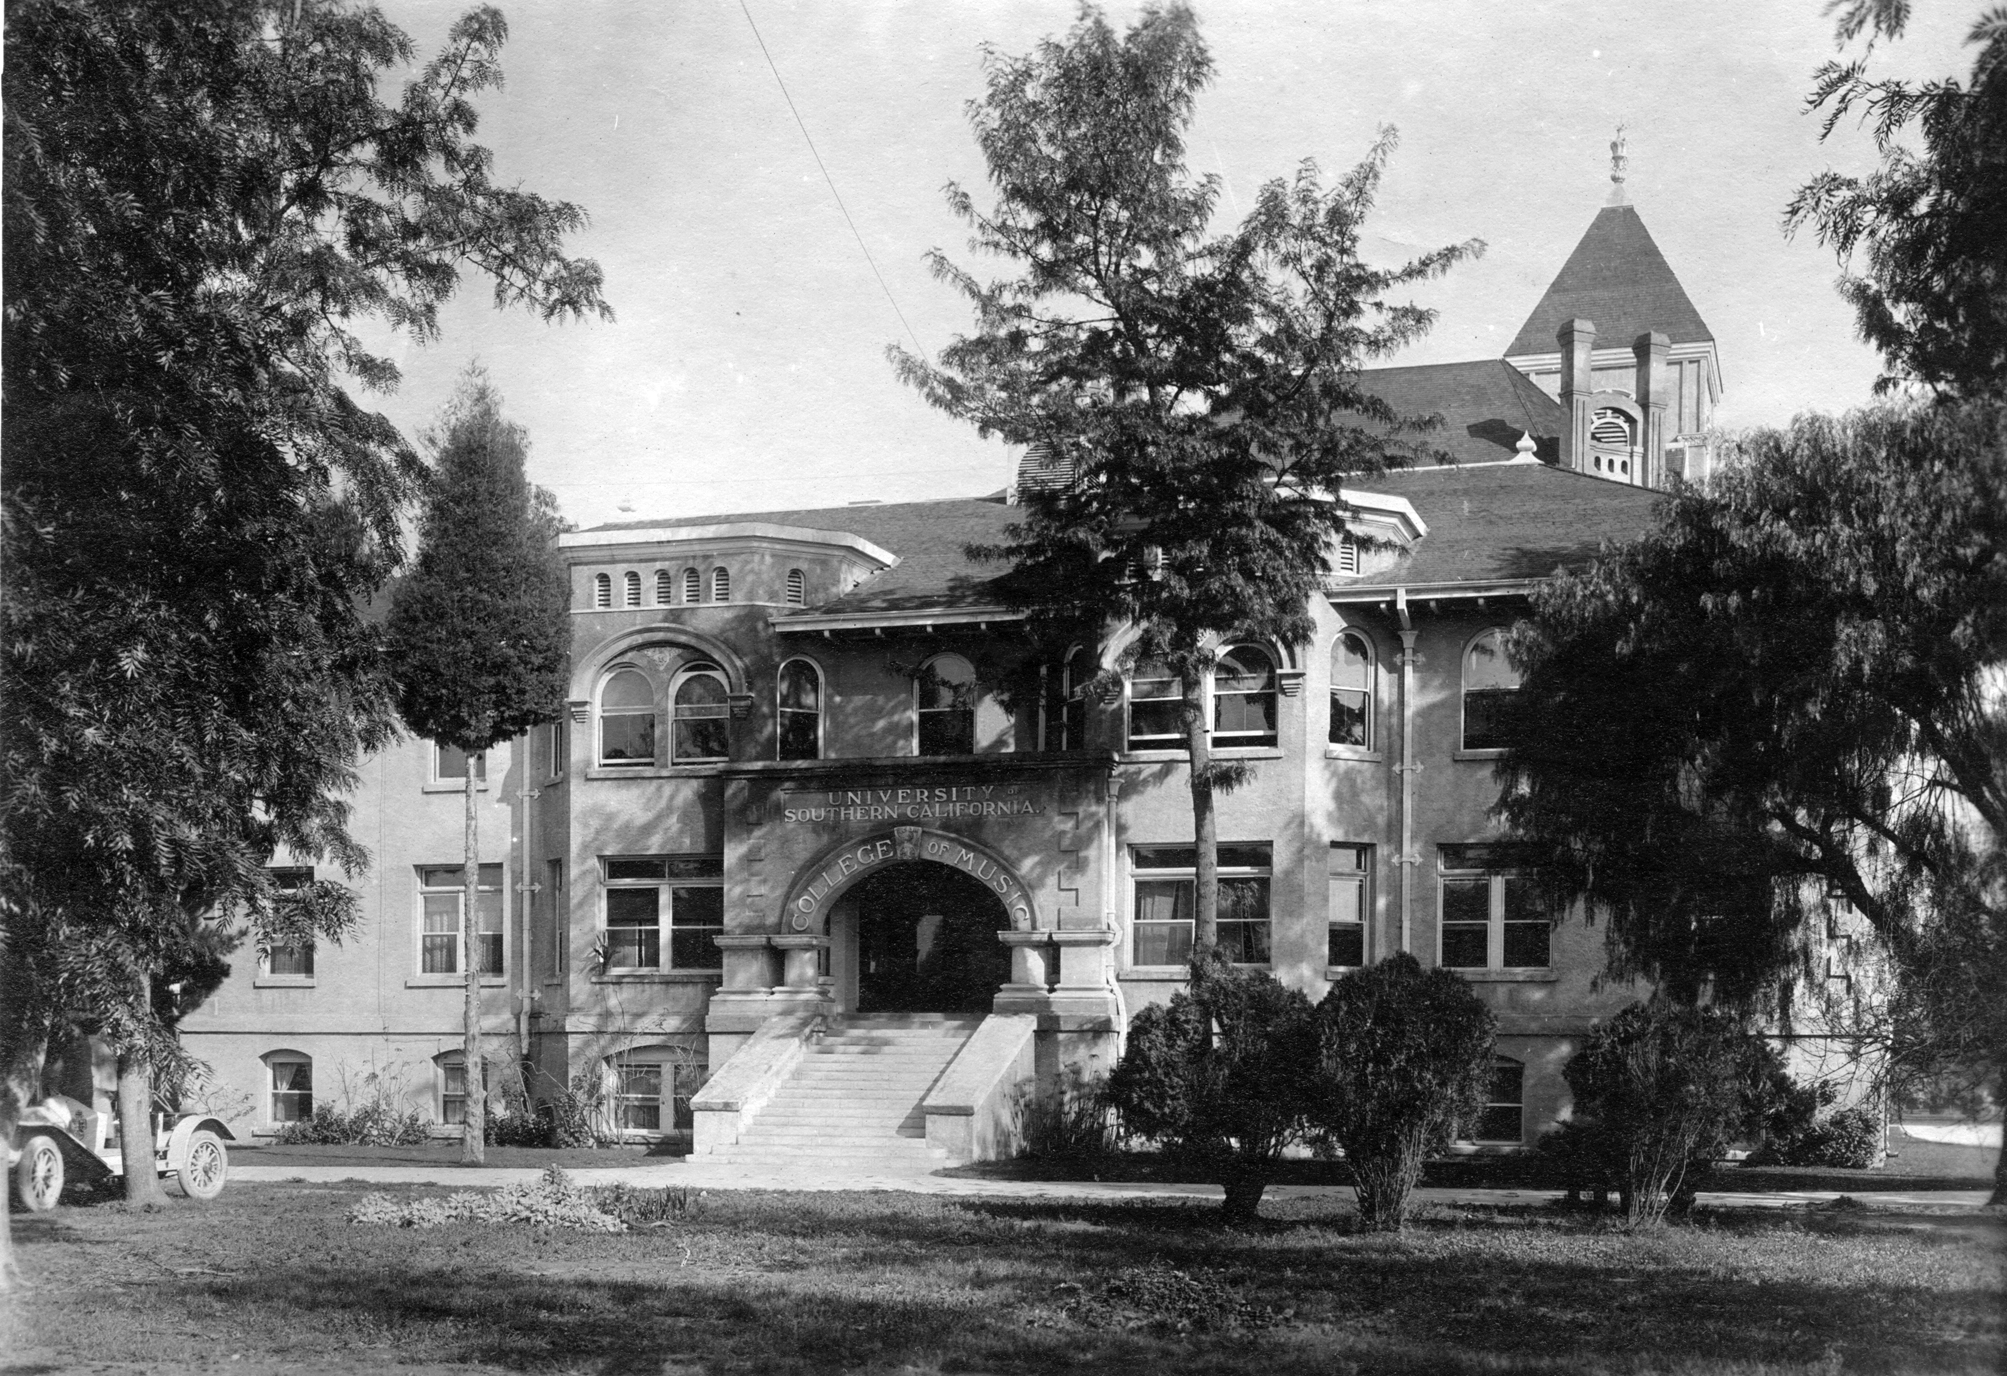 1924: The USC College of Music.